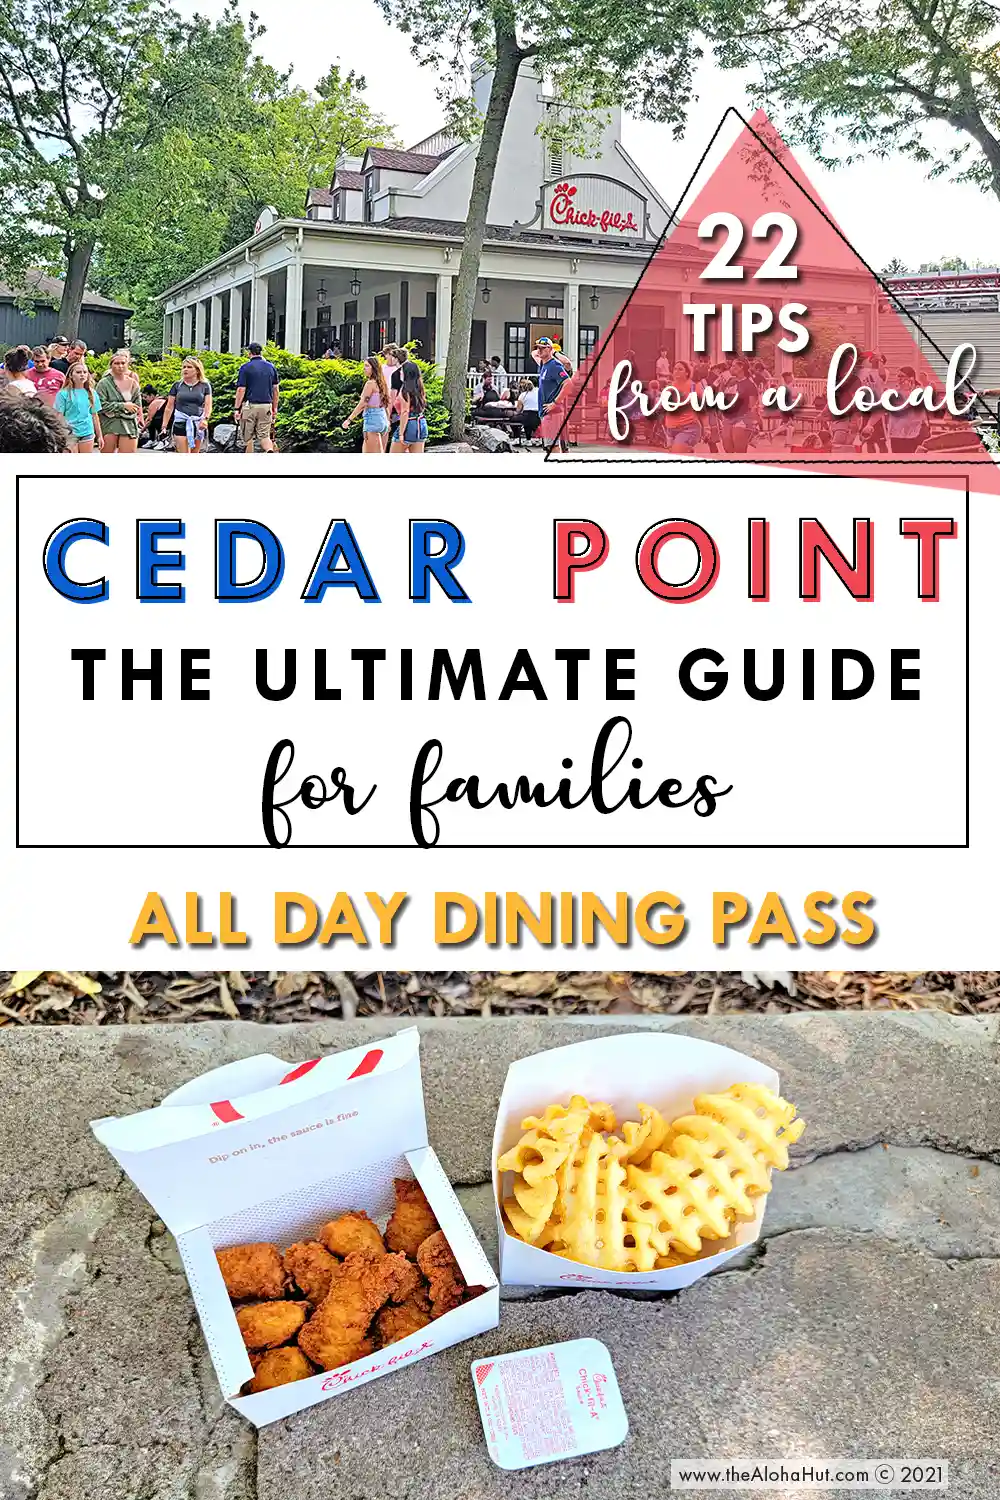 Cedar Point the Ultimate Guide for Families - Tips & Tricks - all day dining food pass